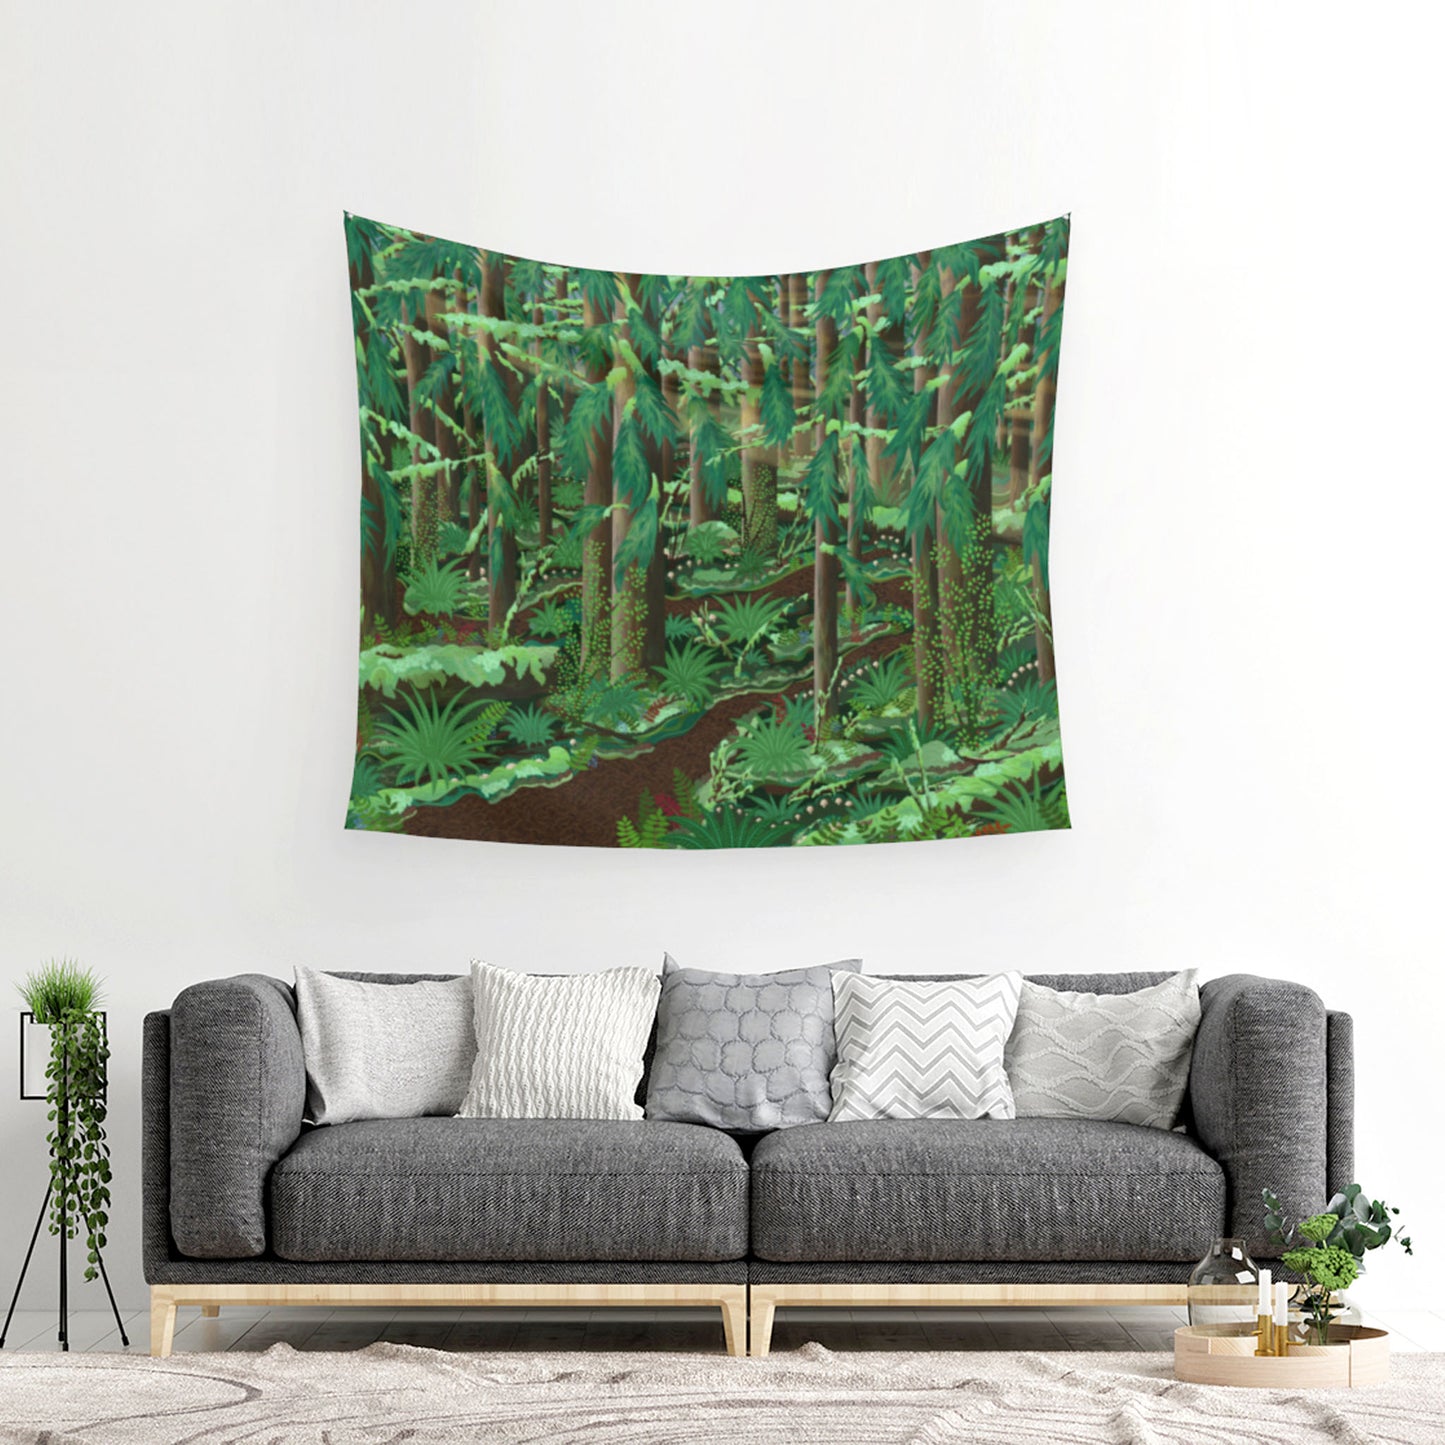 mockup for tapestry on wall with digital design showing a trail in the forest amongst the many trees and their branches branching out as the sun selectively slips through as certain sunbeams above all the mushrooms, ferns, firs and moss hanging on the wall above five belows resting on a pillow couch